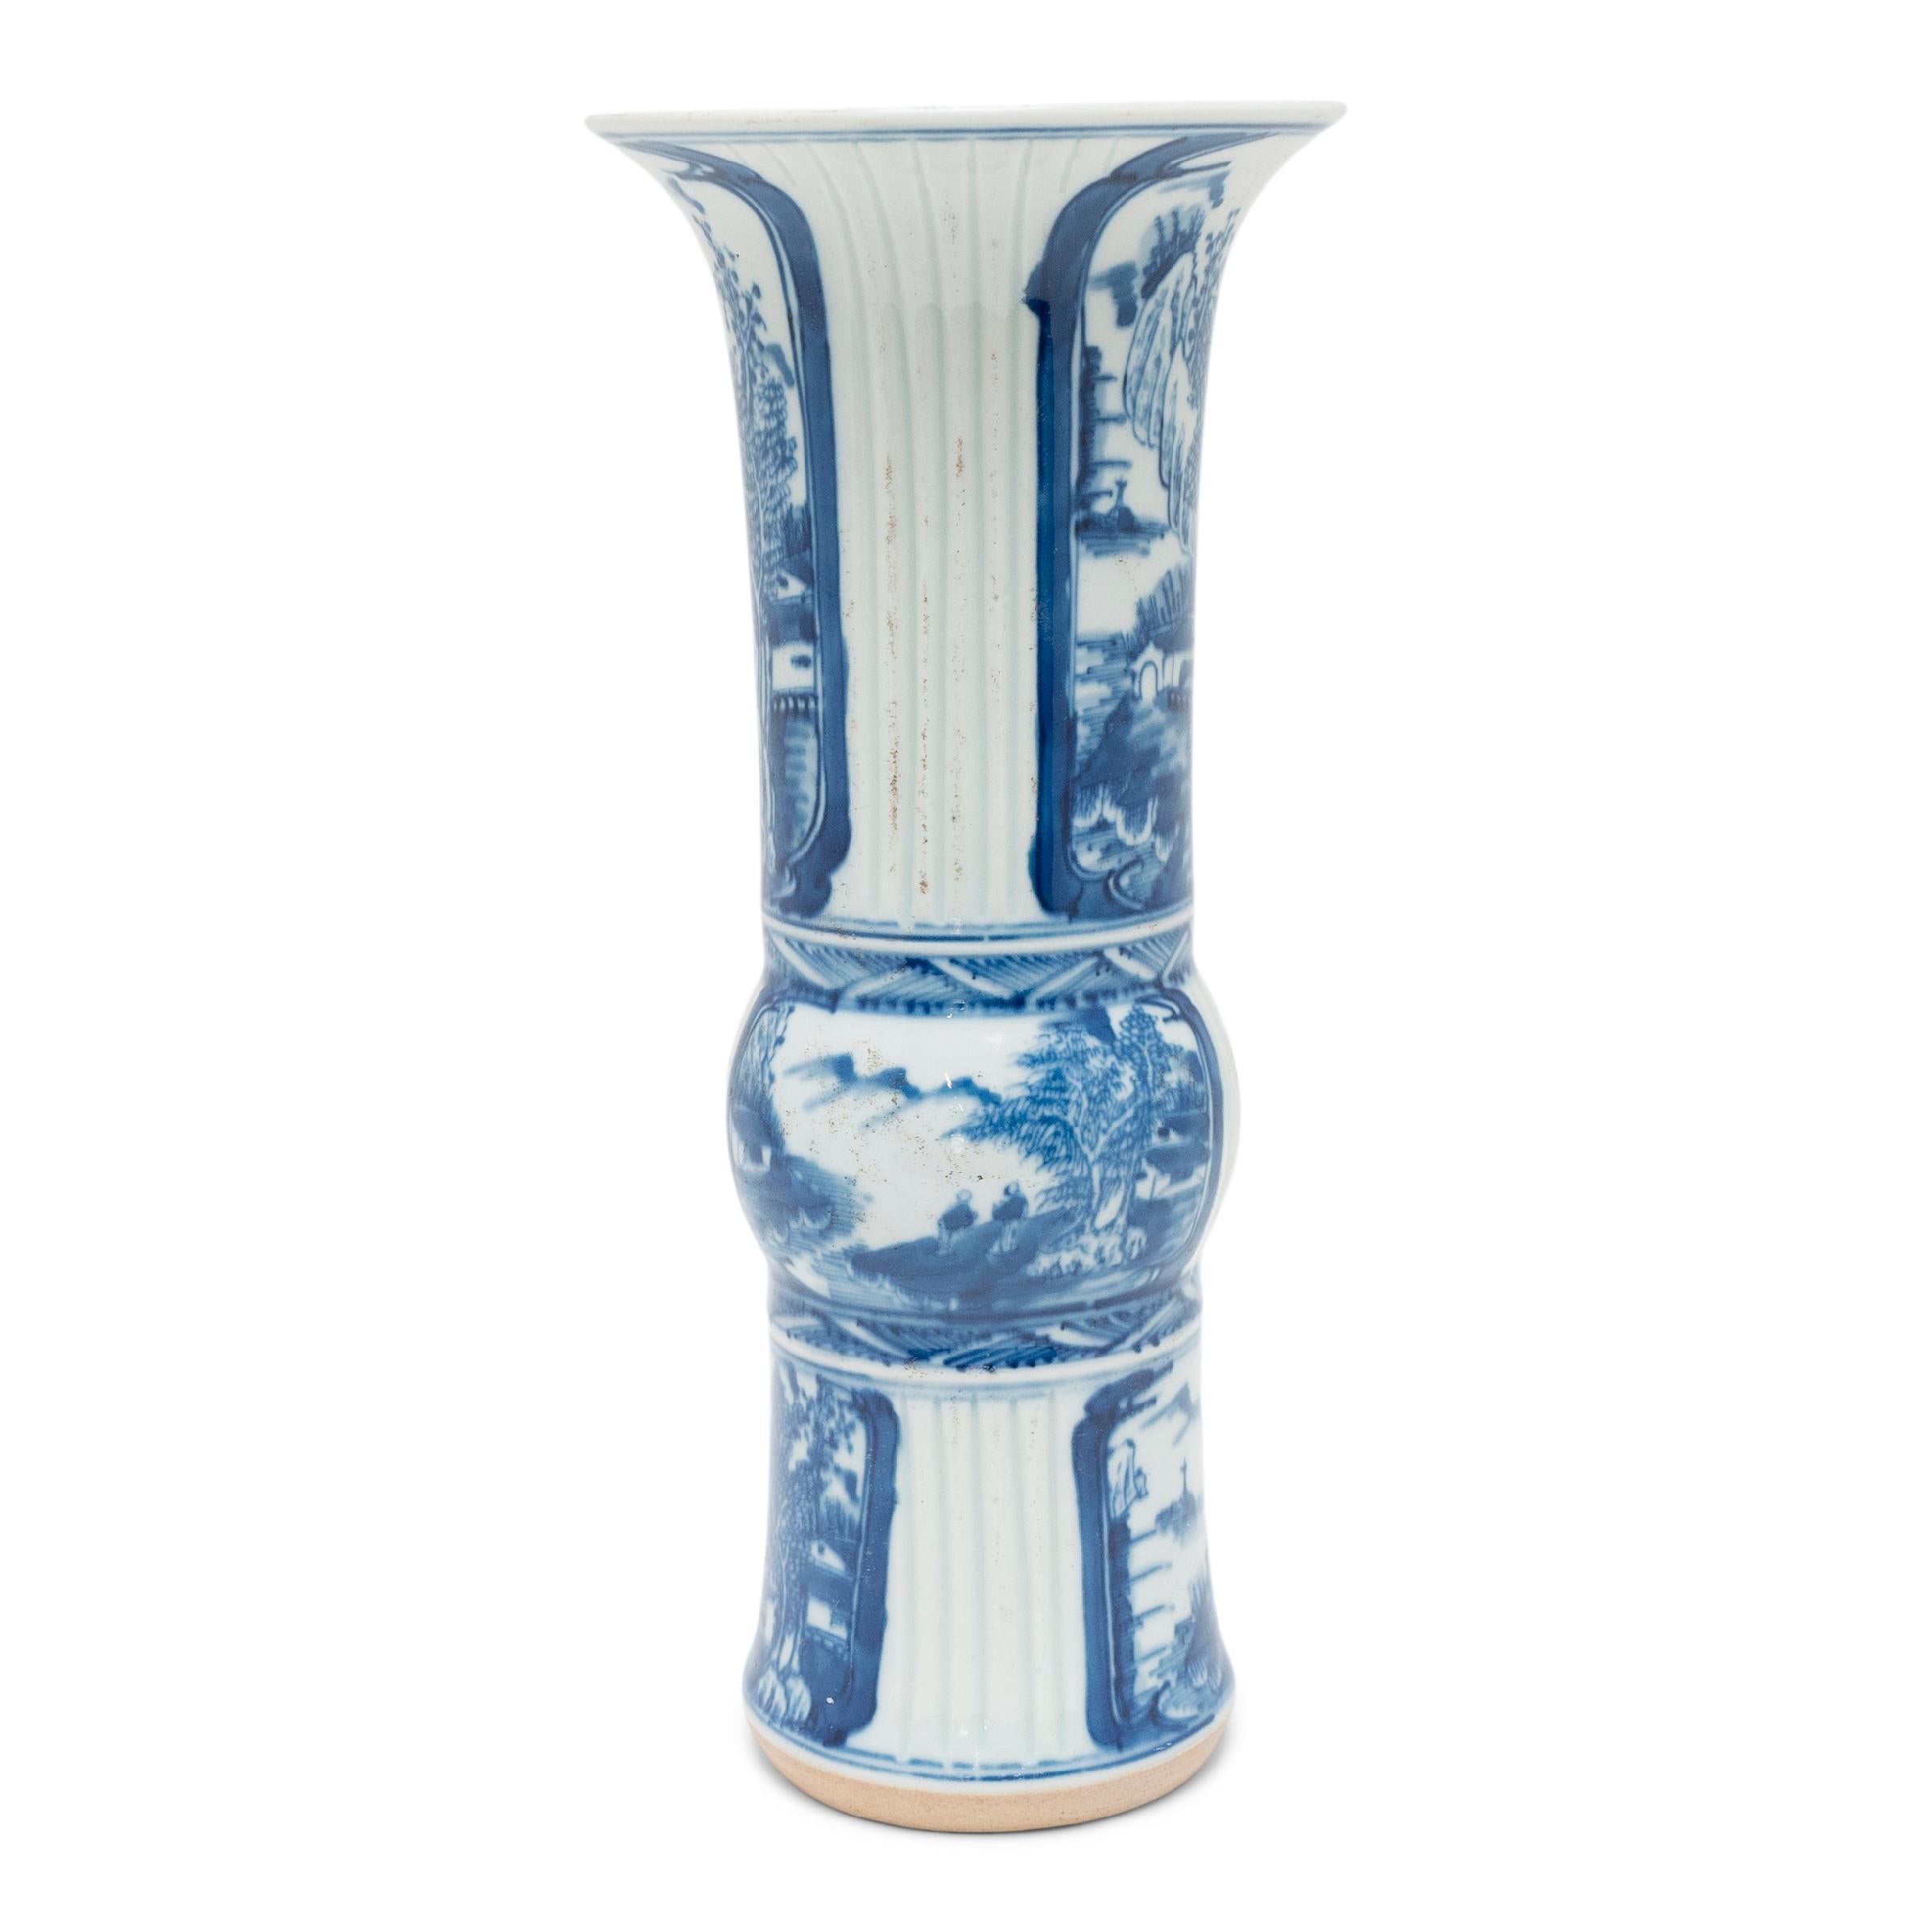 Qing Pair of Chinese Blue and White Gu Vases, c. 1900